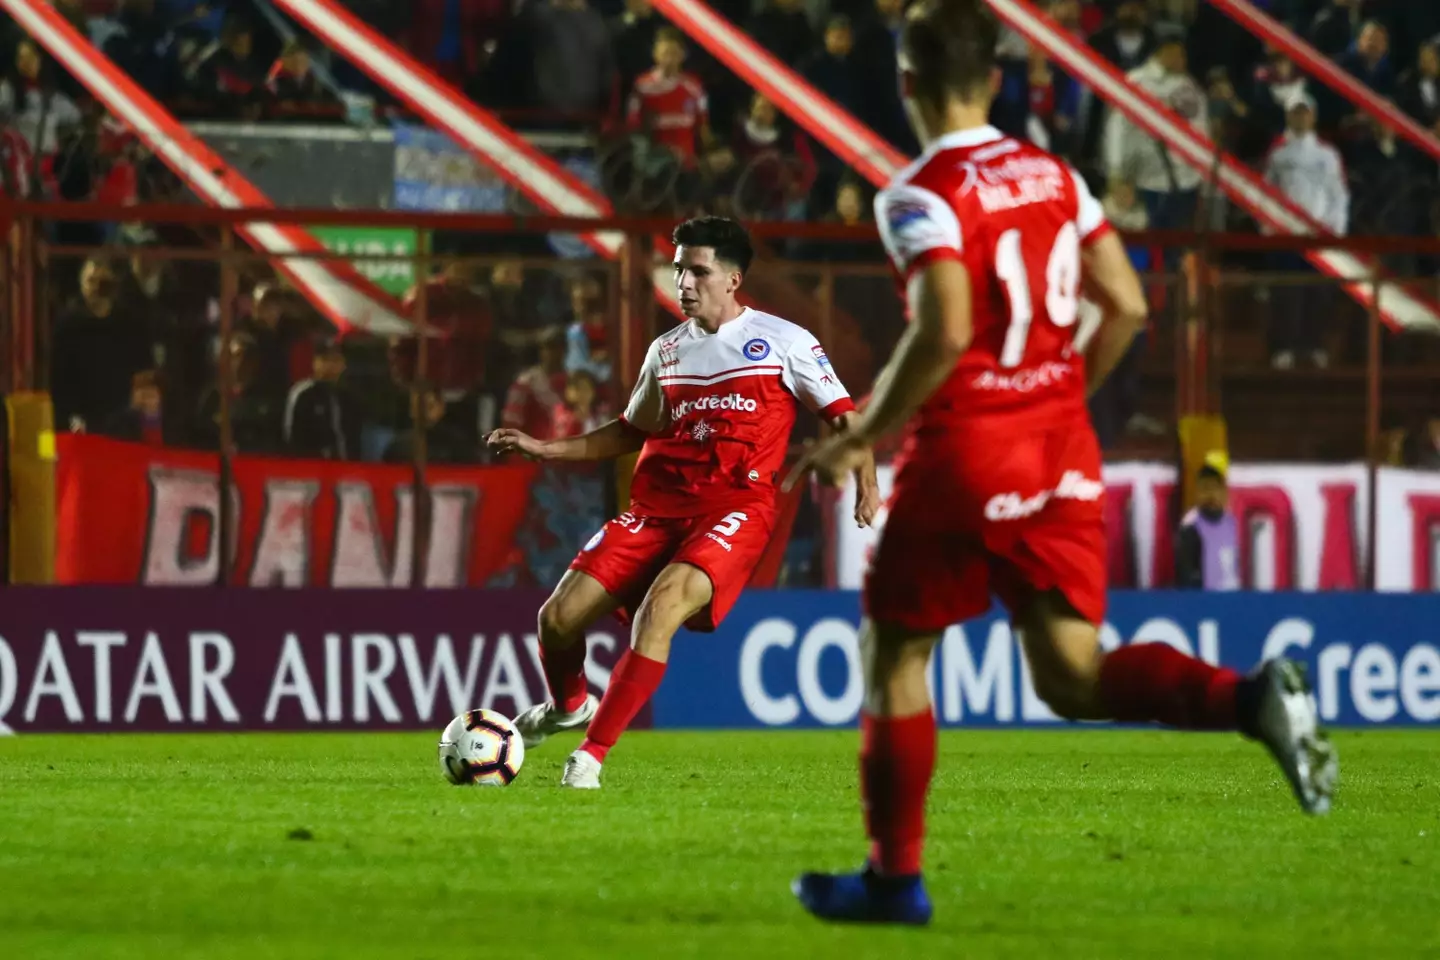 Francis Mac Allister in action for Argentinos Juniors.